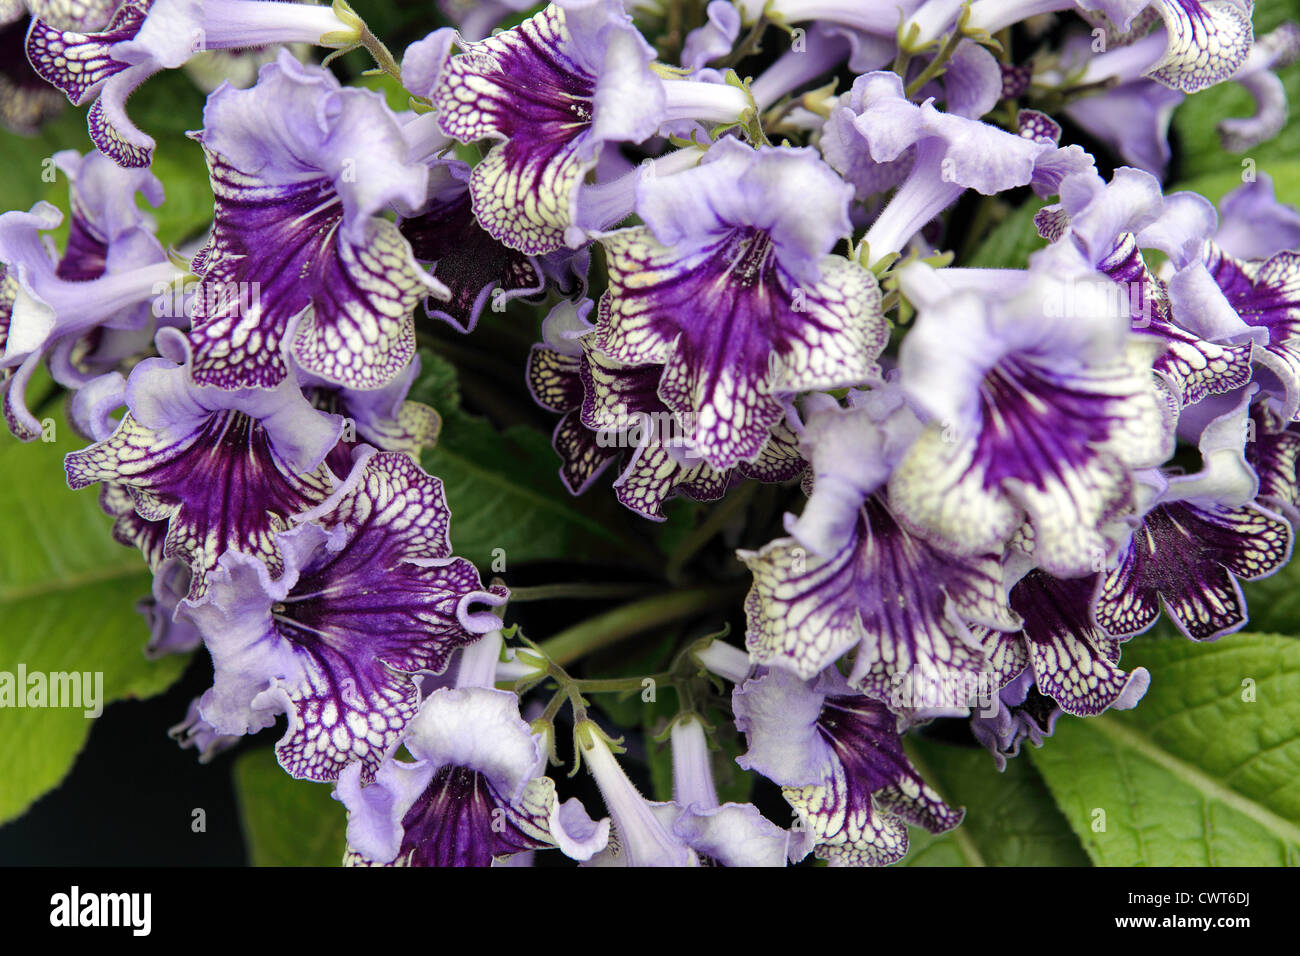 Wonderful example of streptocarpus 'Harlequin Lace' with green foliage in the background. Stock Photo